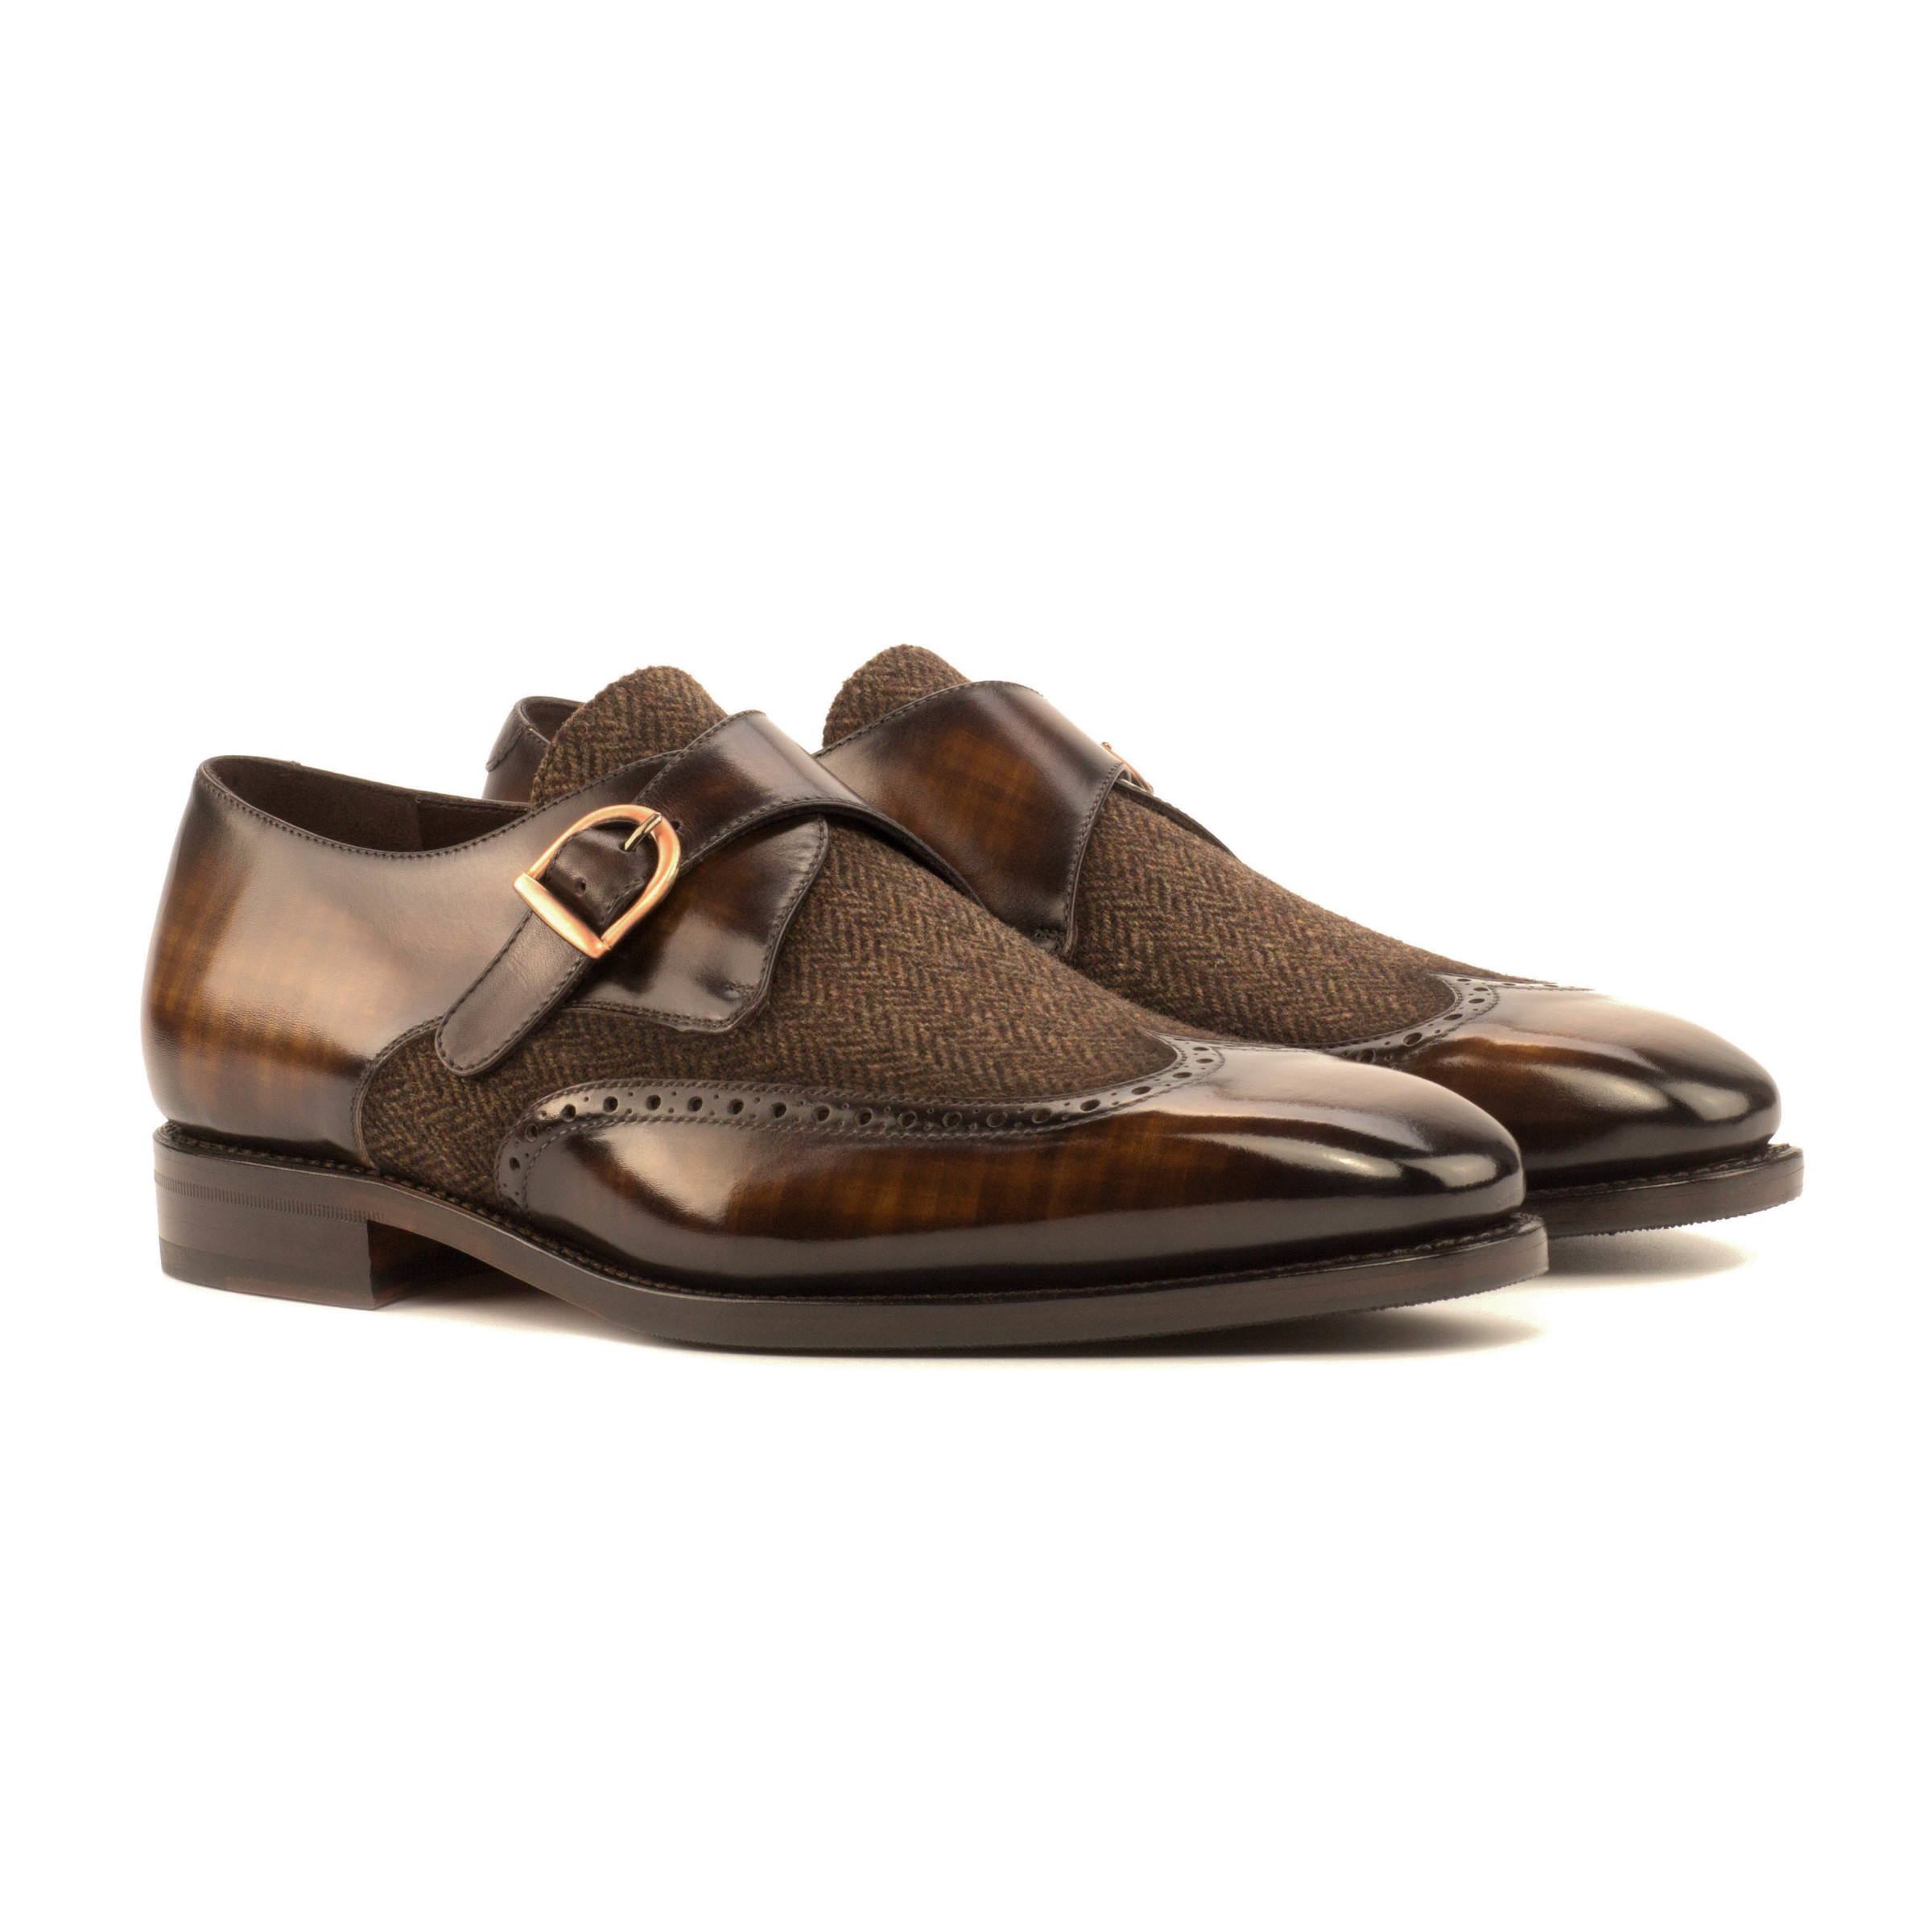 The Abbot: Brown Patina/Herringbone Sartorial. Front facing view of Herringbone sartorial and Brown patina single strap monk style shoes on white background